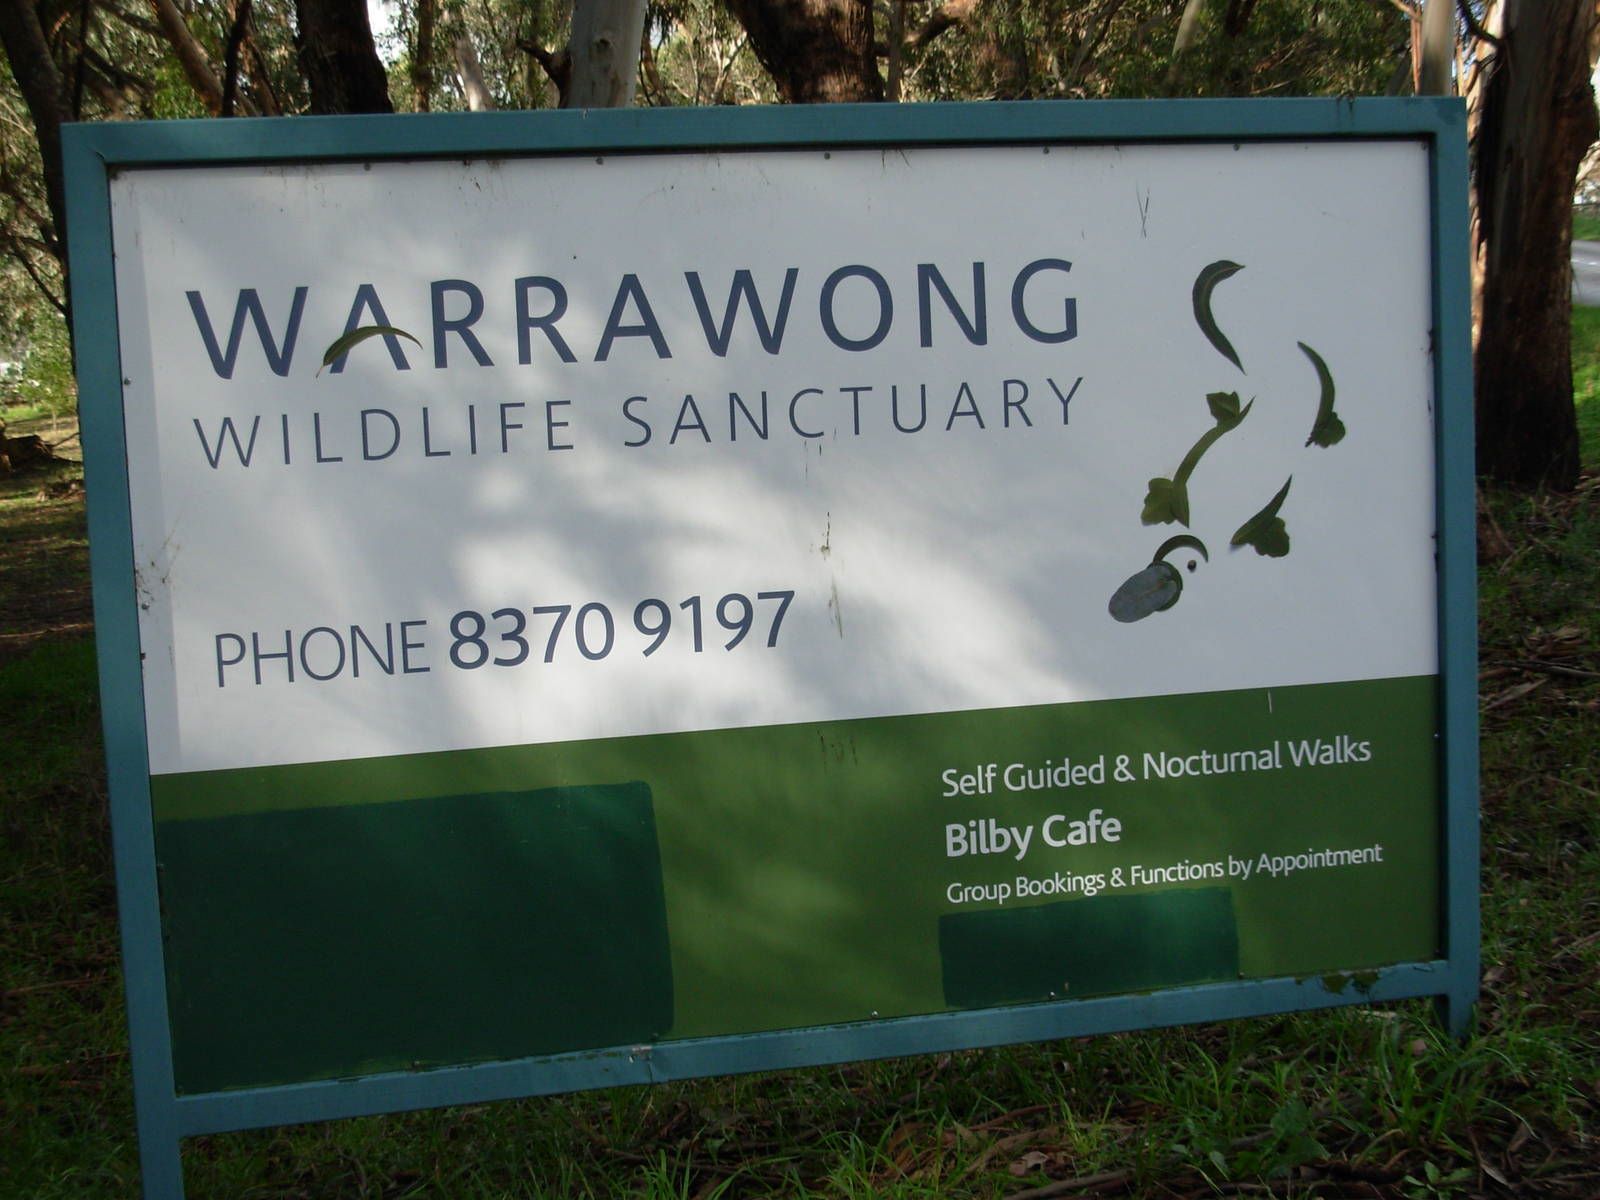 14-extraordinary-facts-about-warrawong-wildlife-sanctuary